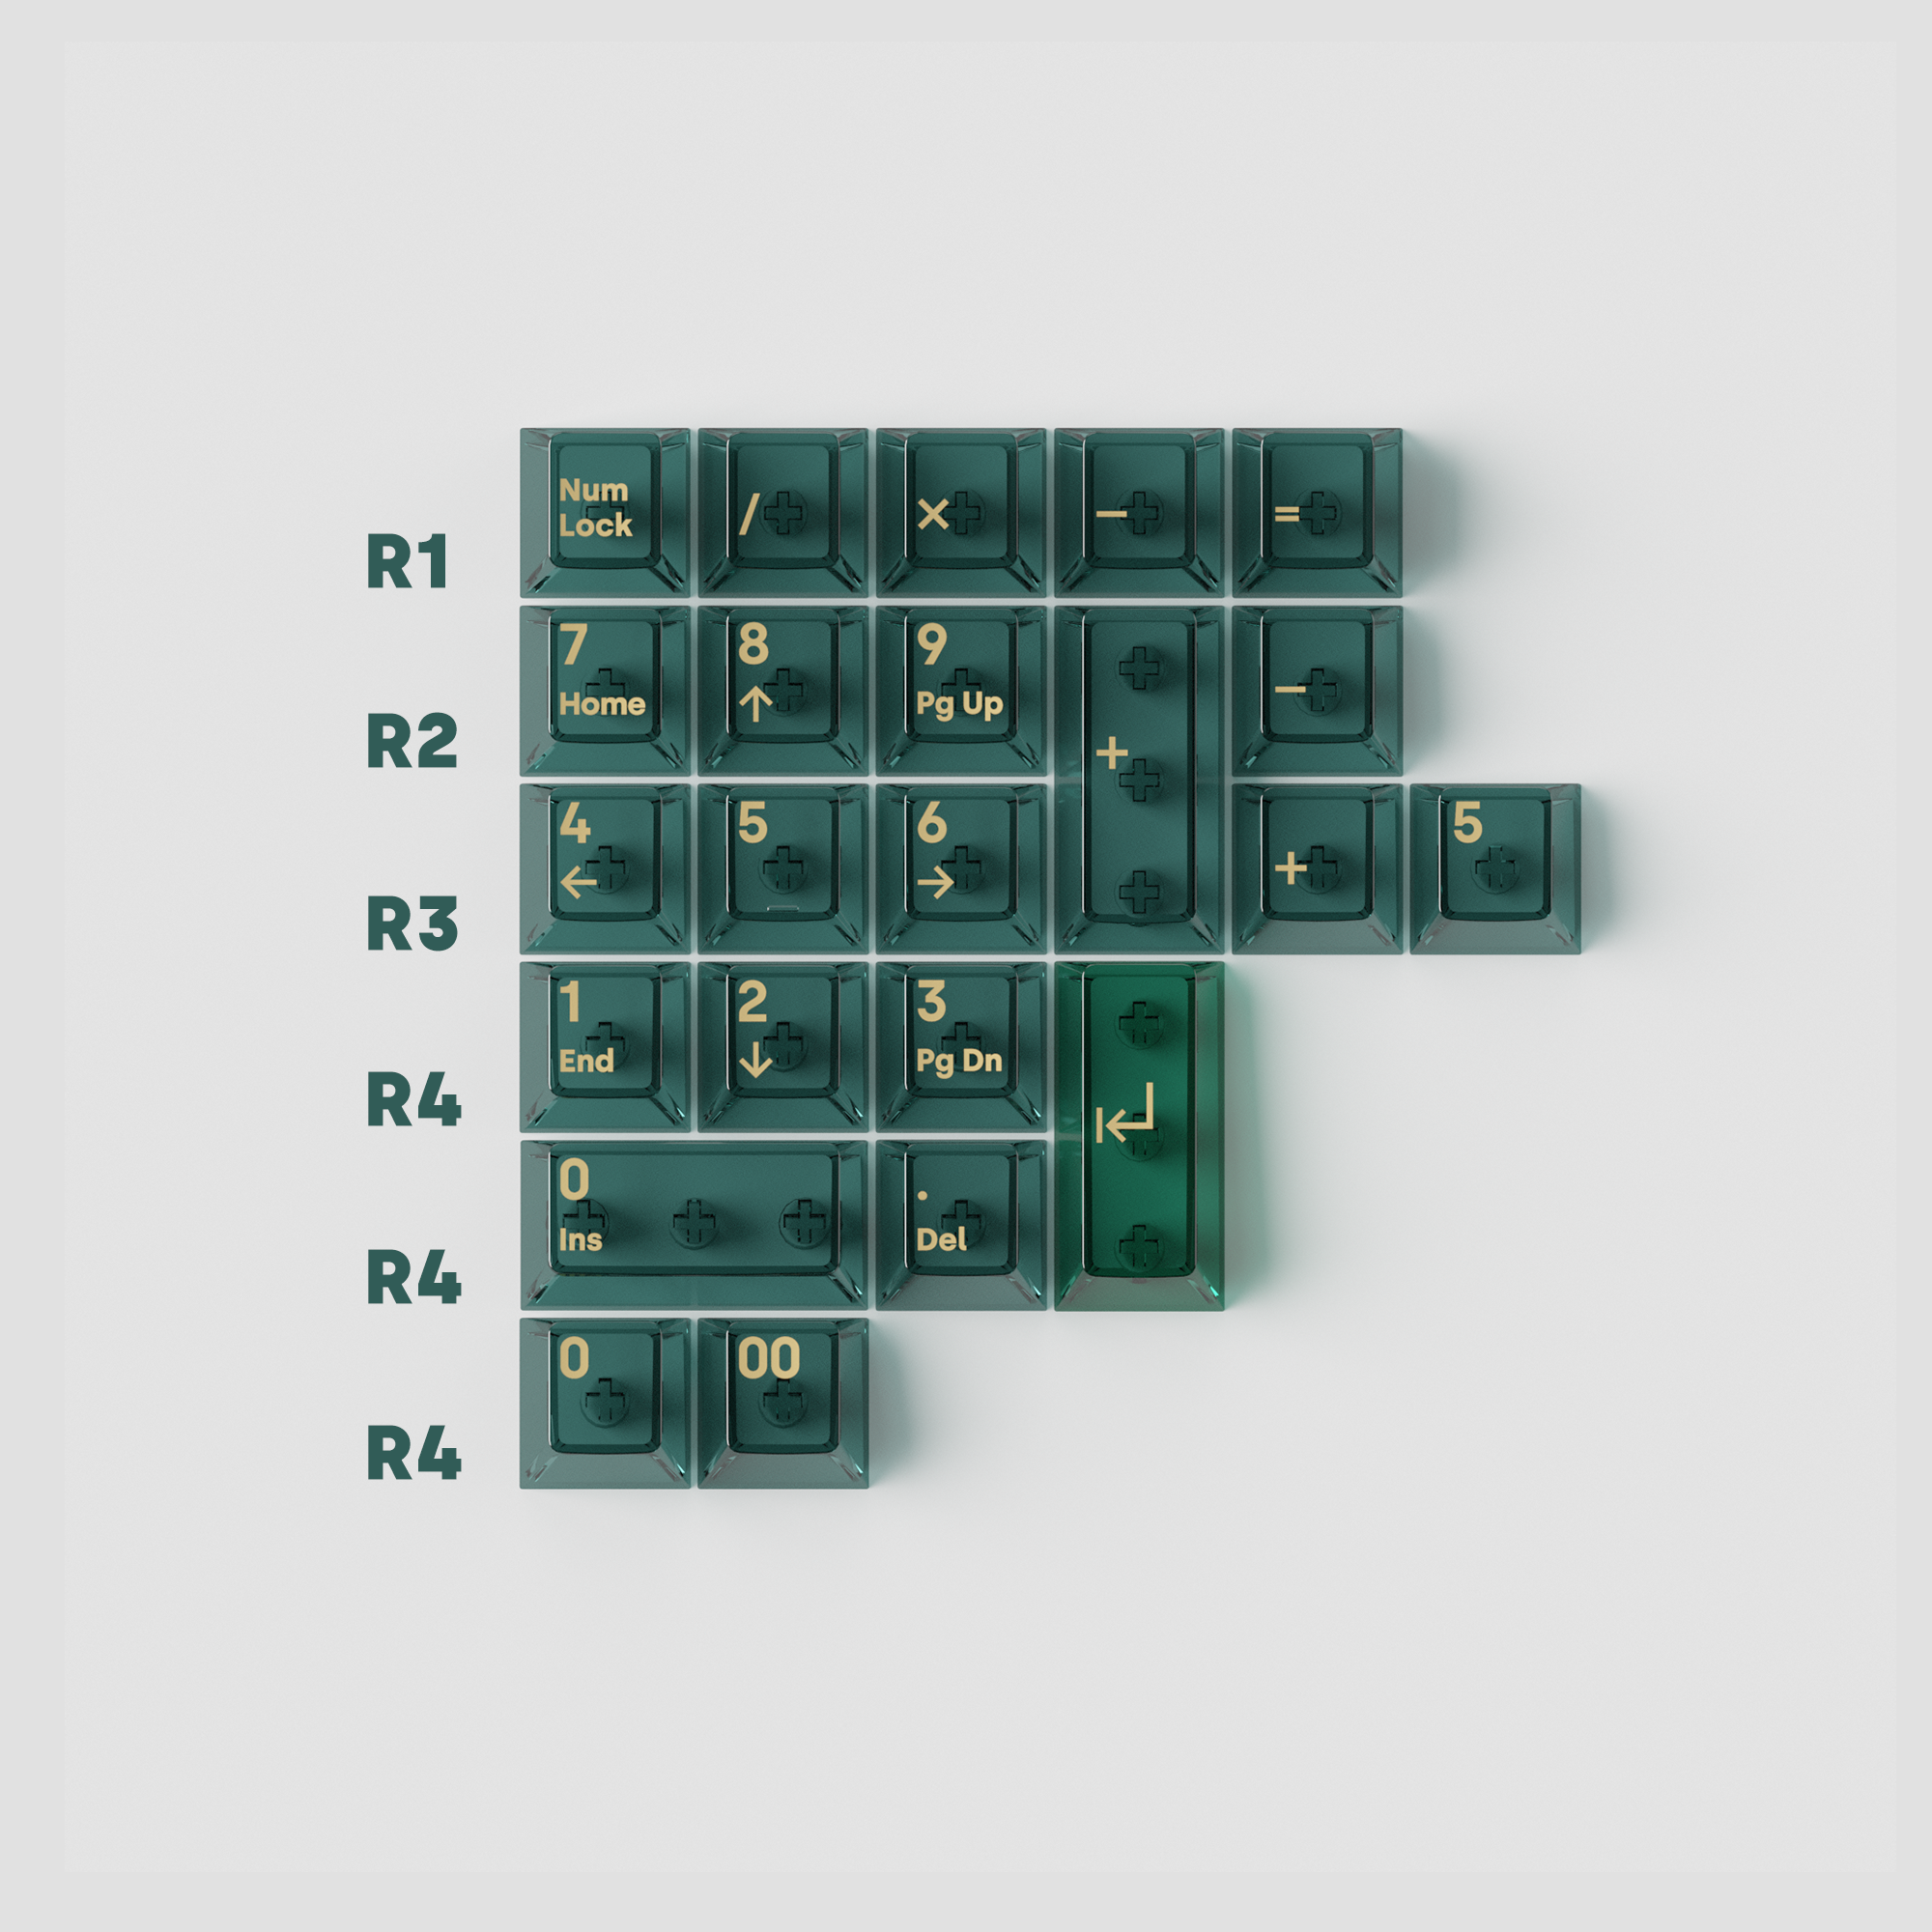 [Group Buy] Deadline Air-mallche PC Keycaps - KeebsForAll